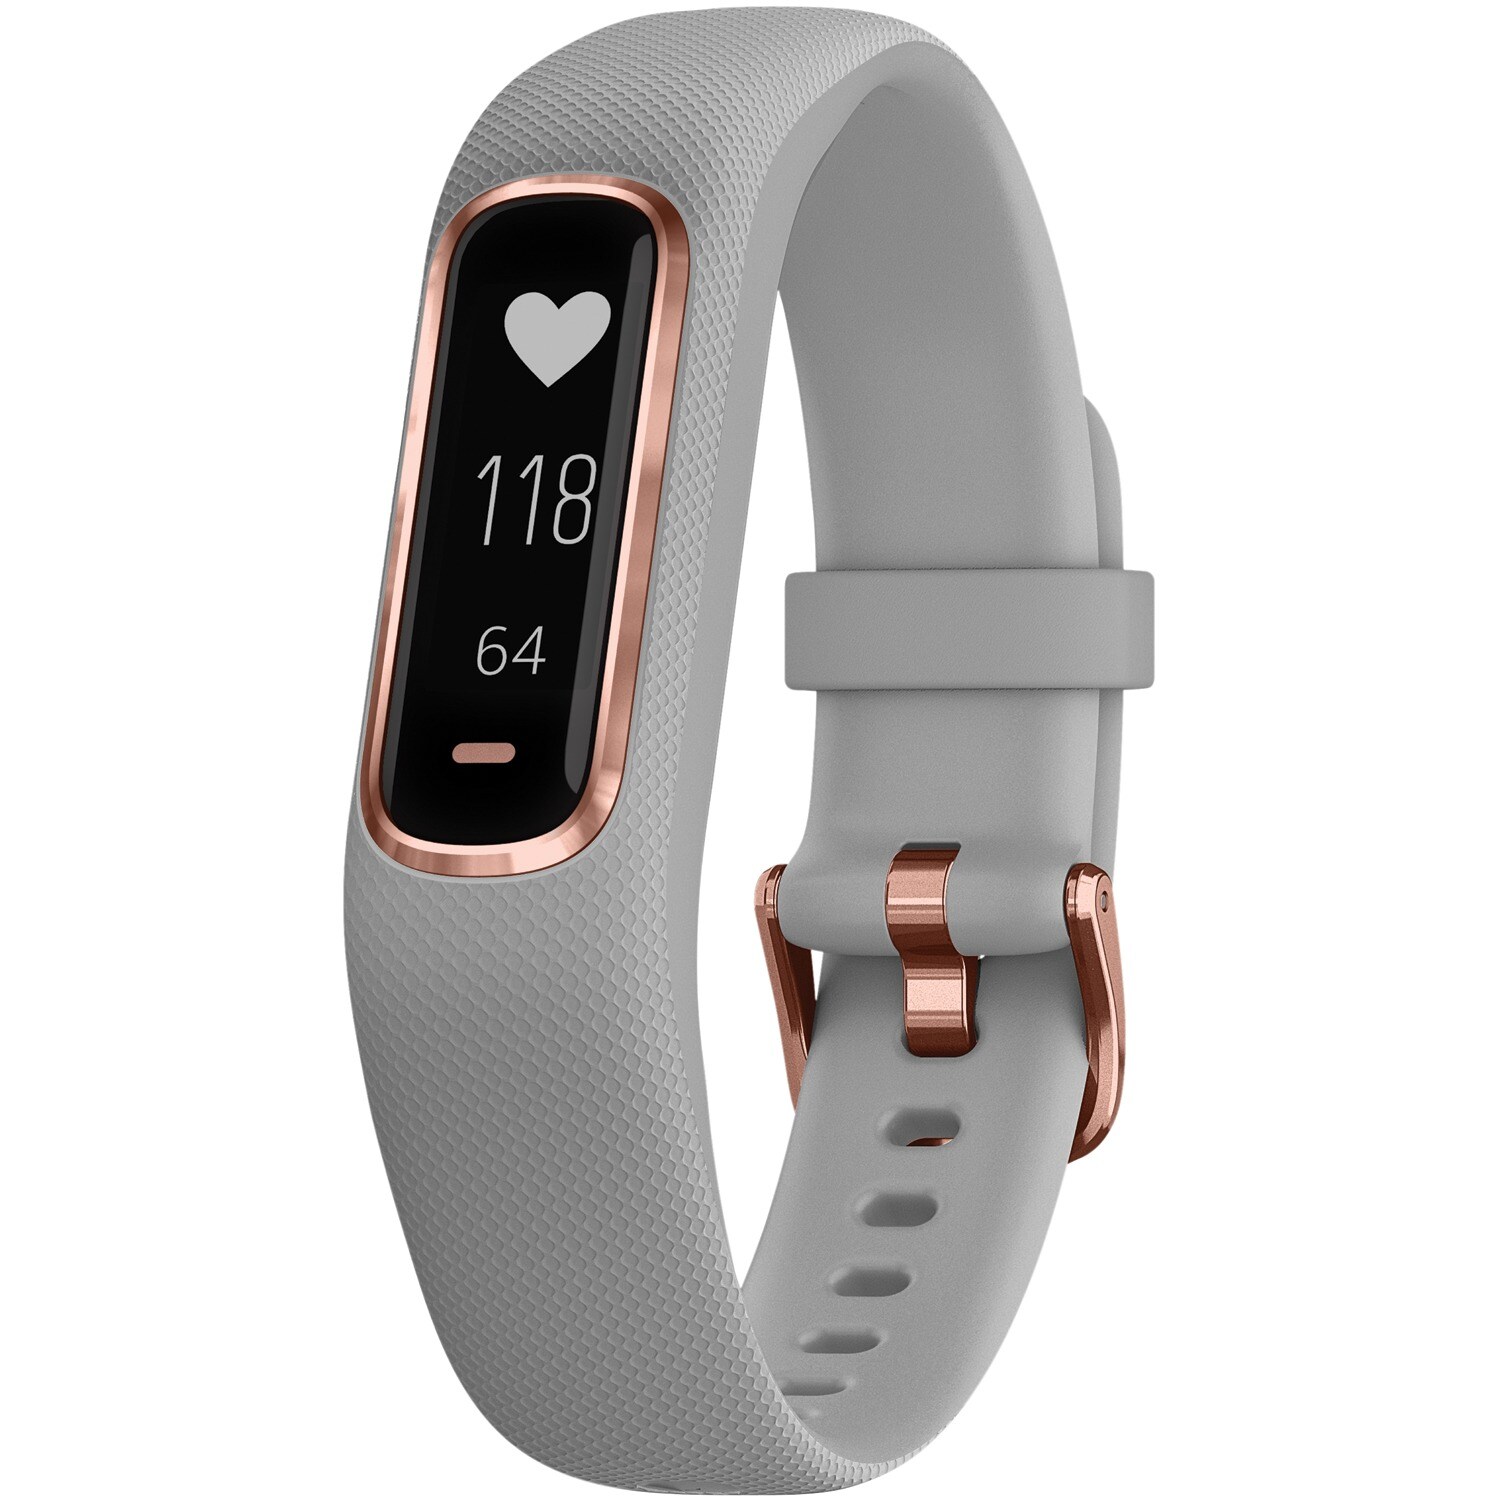 Garmin Vivosmart 4 Fitness Tracker with Step Counter, Heart Rate Monitor  and Gps Enabled at